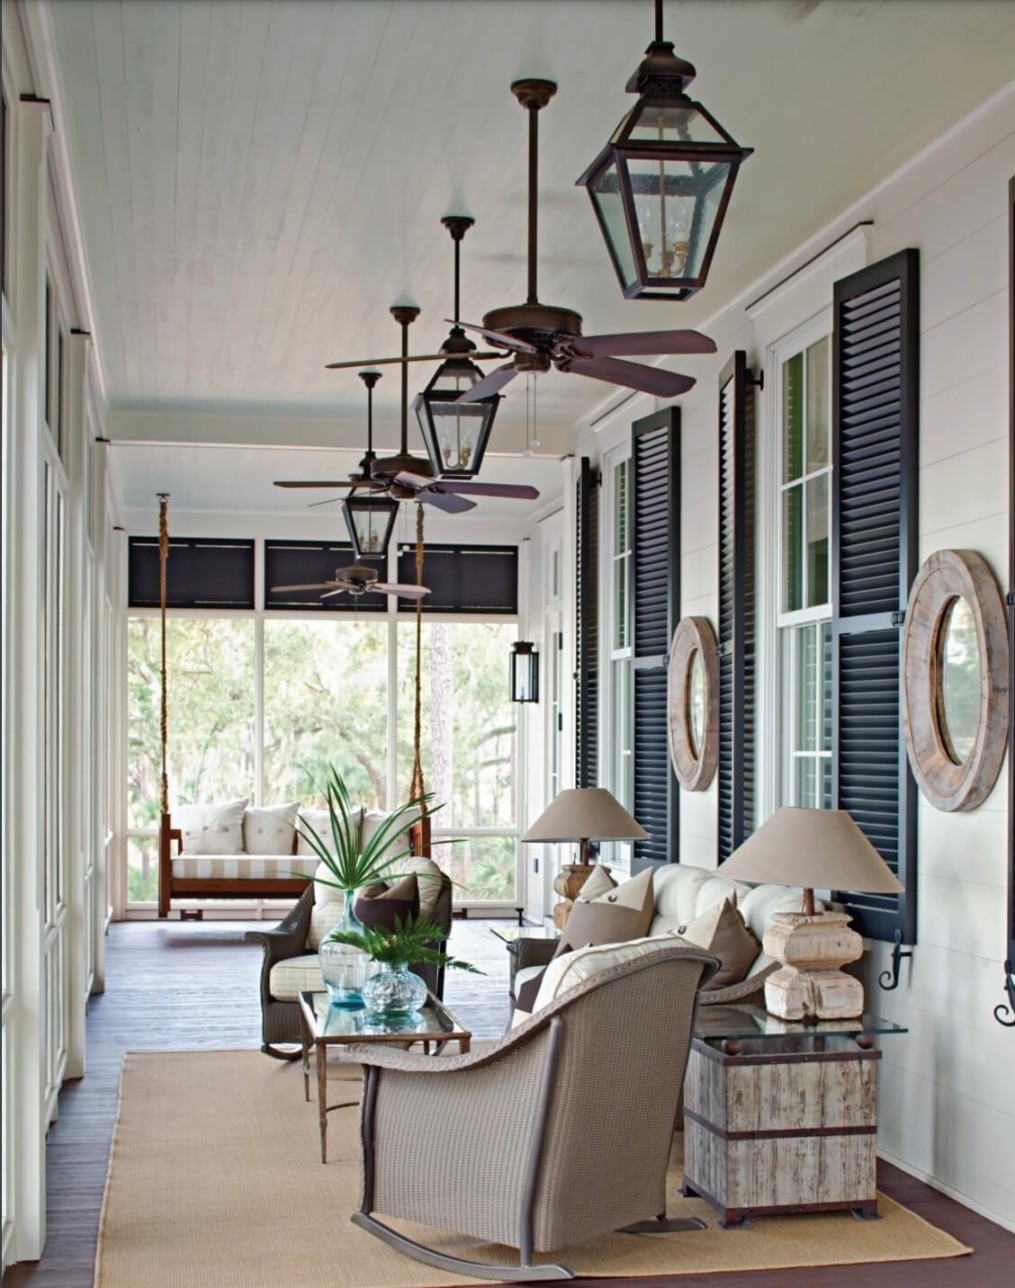 JRL Interiors — Ceiling Fans: How and where to use them, and the